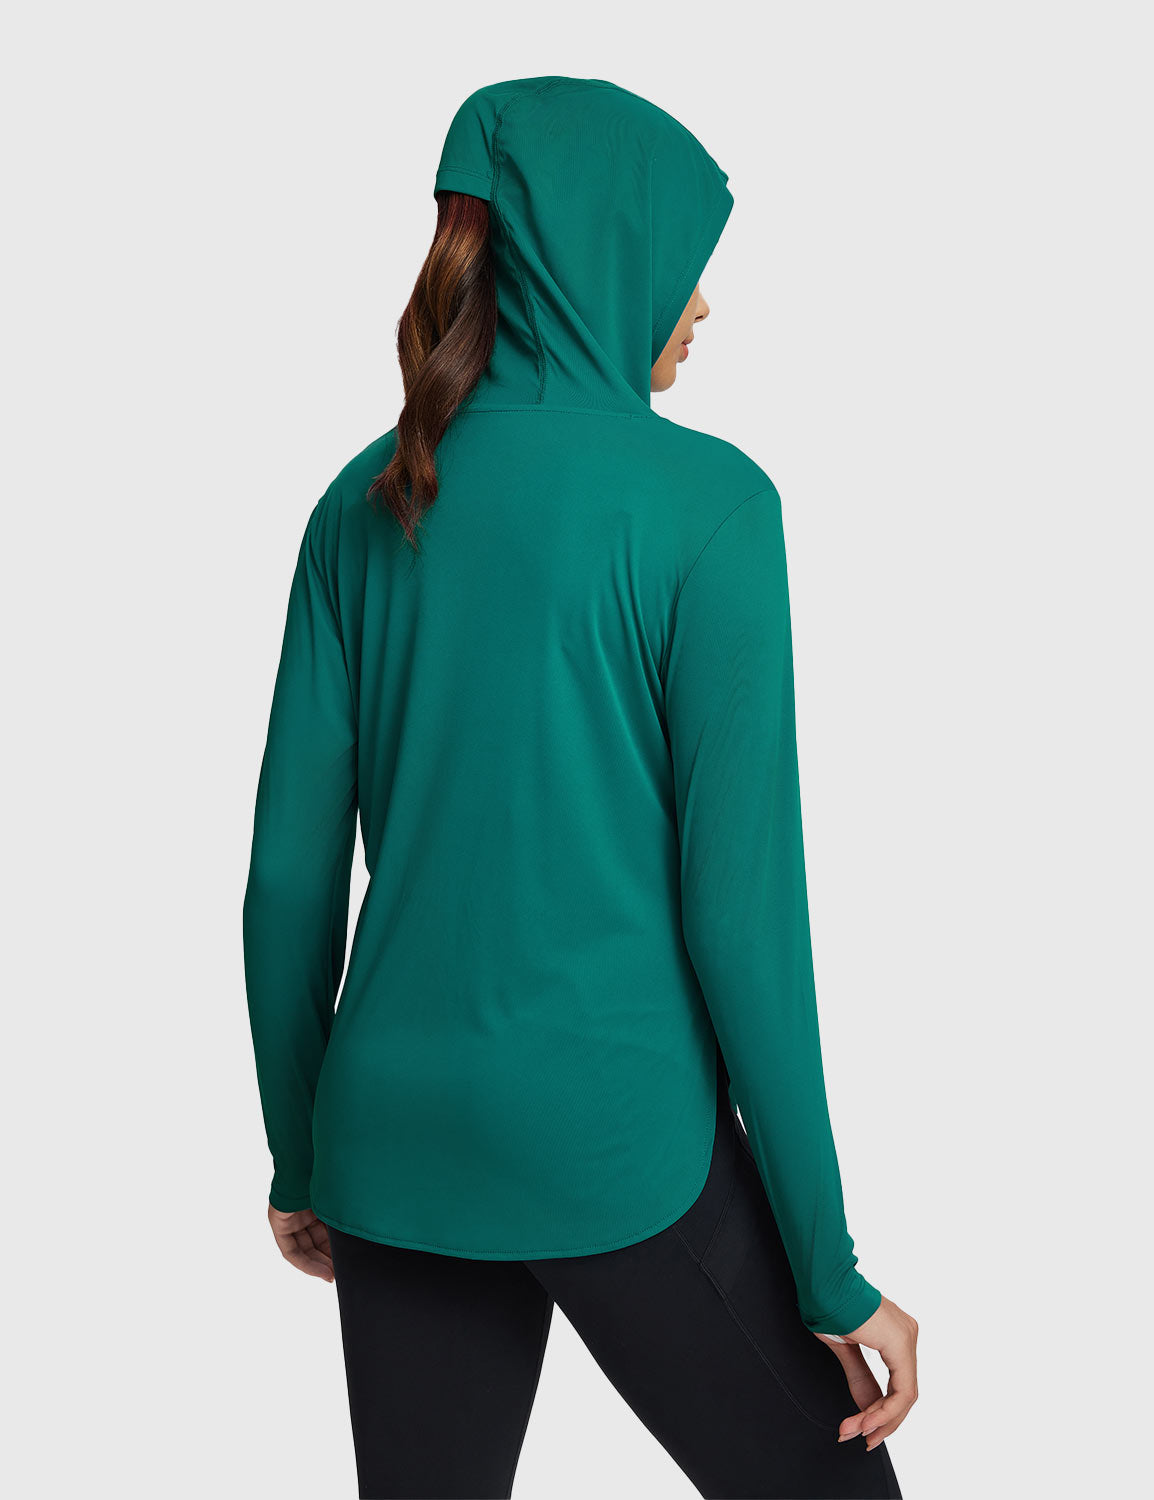 Baleaf Women's Rounded Hem Hooded Long Sleeve Teal Green with Horsetail Hole